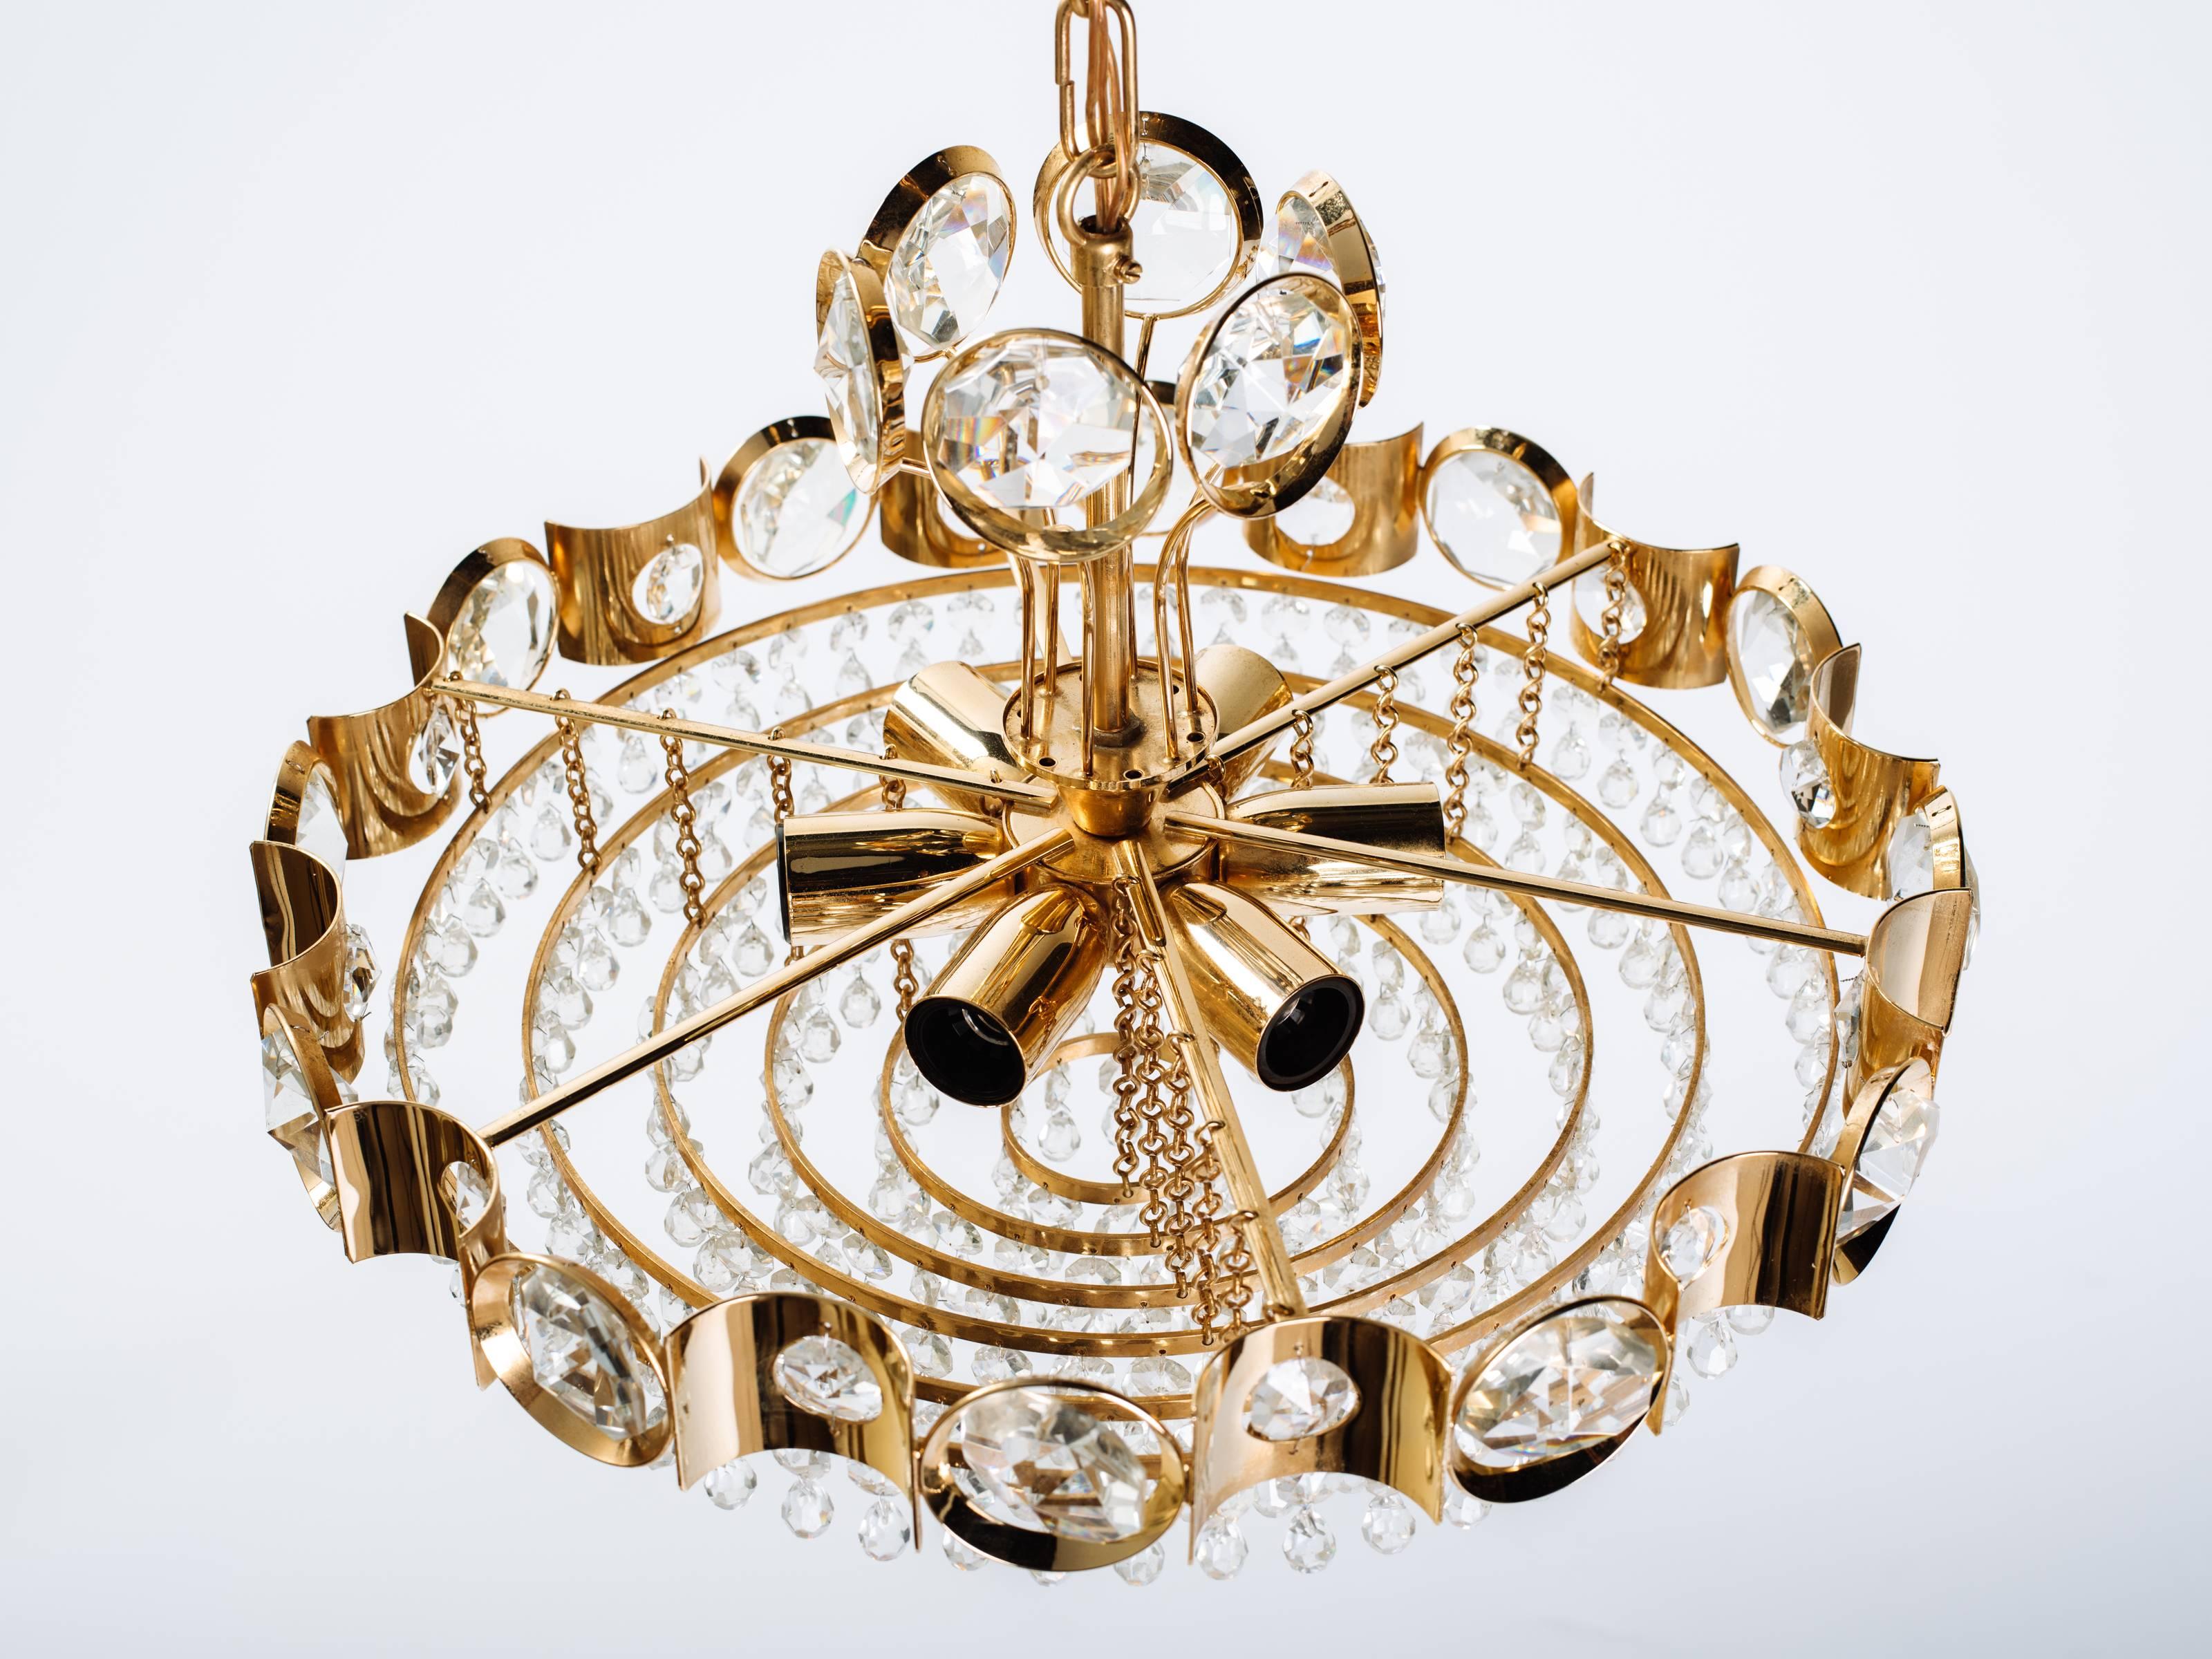 Mid-20th Century Mid-Century Modern Jeweled Cut Crystal and Gold Chandelier by Lobmeyr